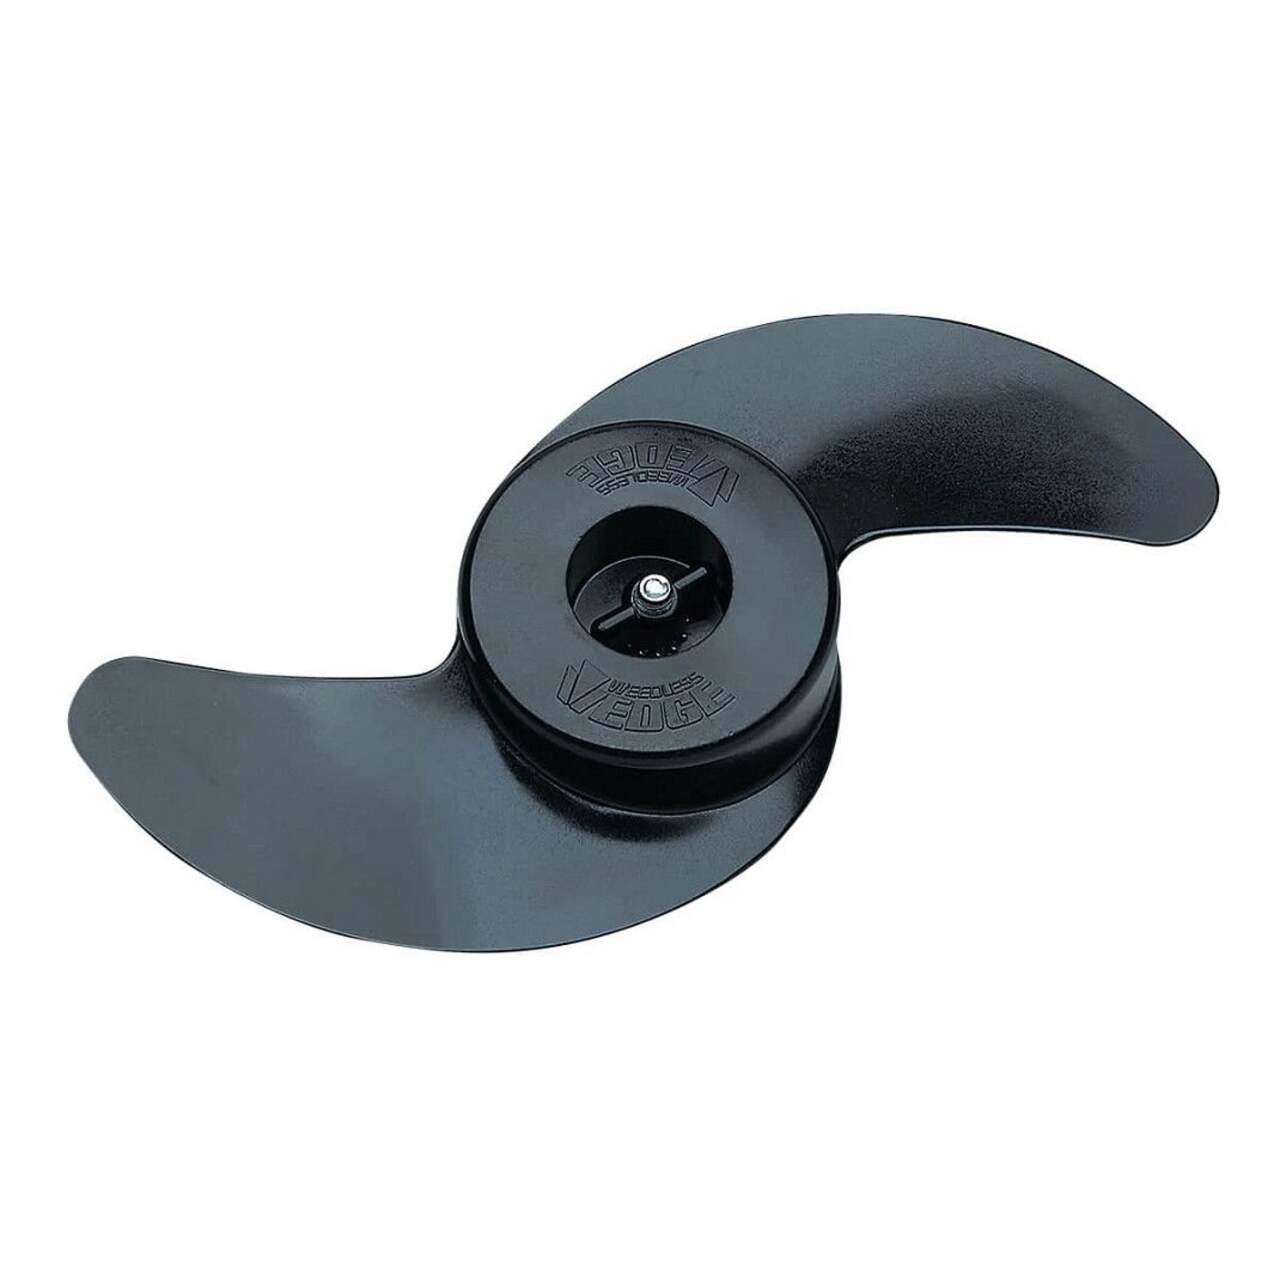 https://media-www.canadiantire.ca/product/playing/fishing/fishing-equipment/0798518/minn-kota-mkp-6-weedless-wedge-propellor-6--3a4aaca2-5ad0-43b3-ac97-6be1b64282c2-jpgrendition.jpg?imdensity=1&imwidth=640&impolicy=mZoom